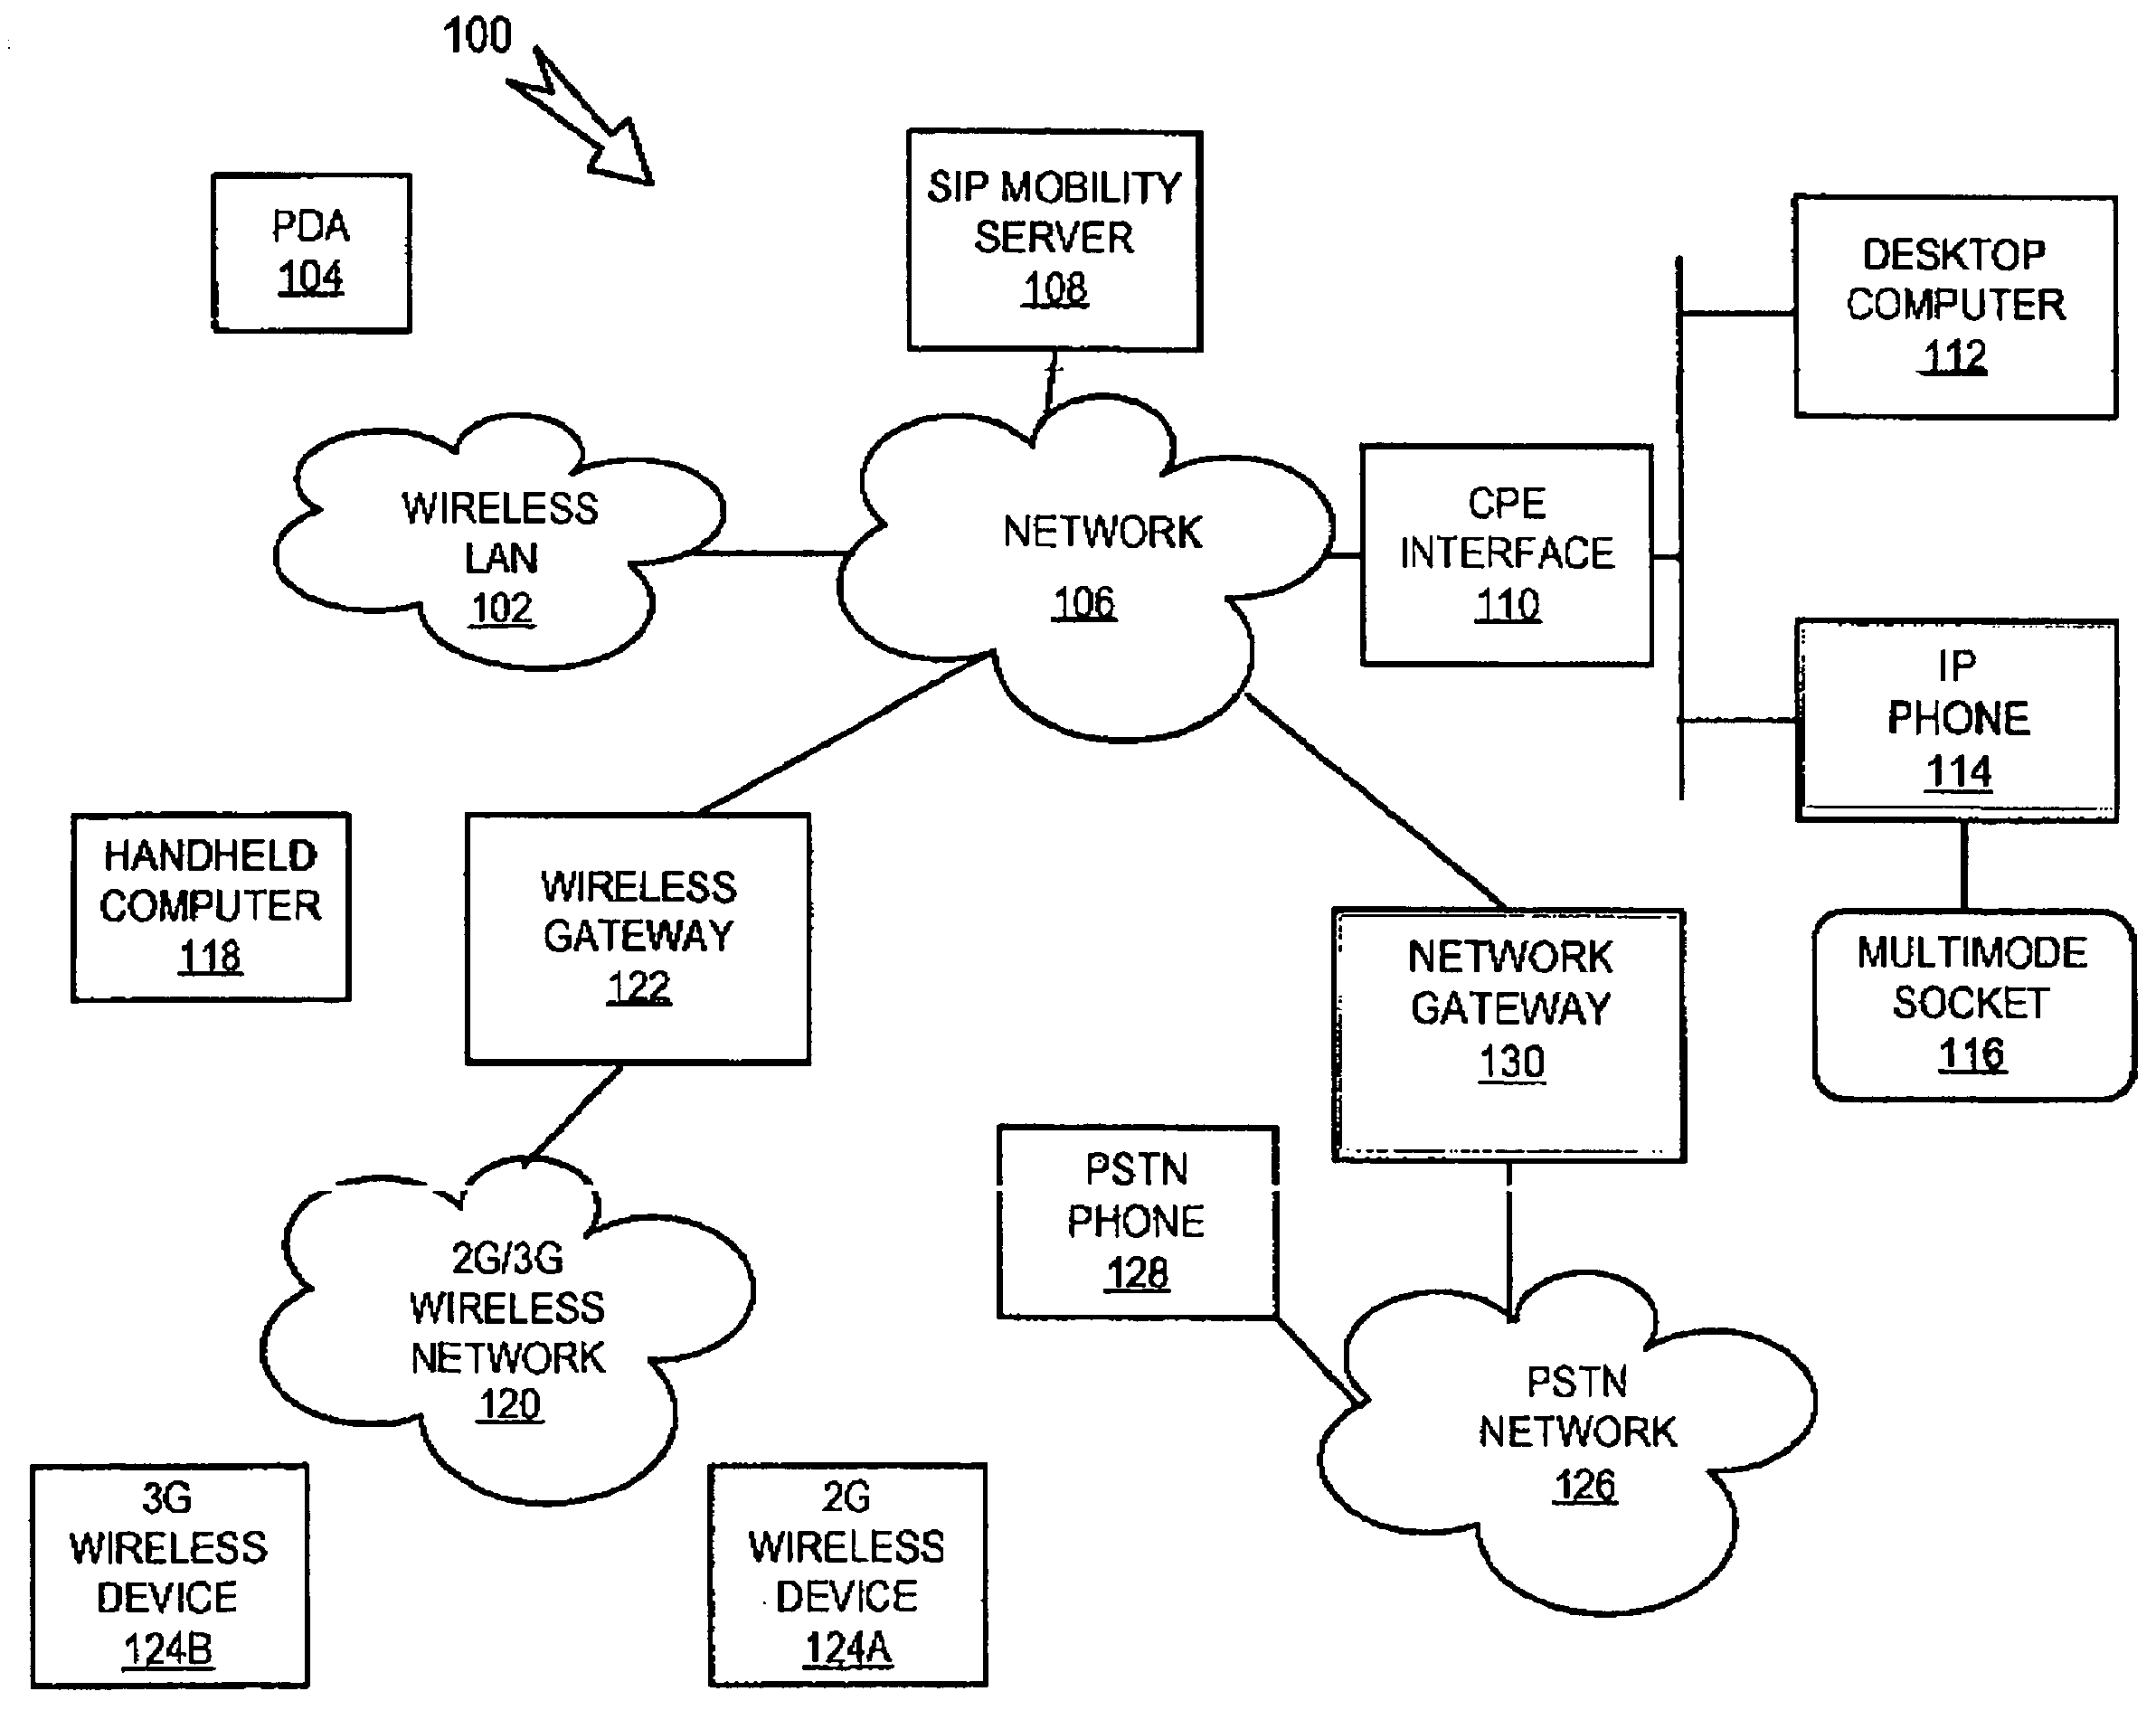 Fixed-mobile communications with mid-session mode switching